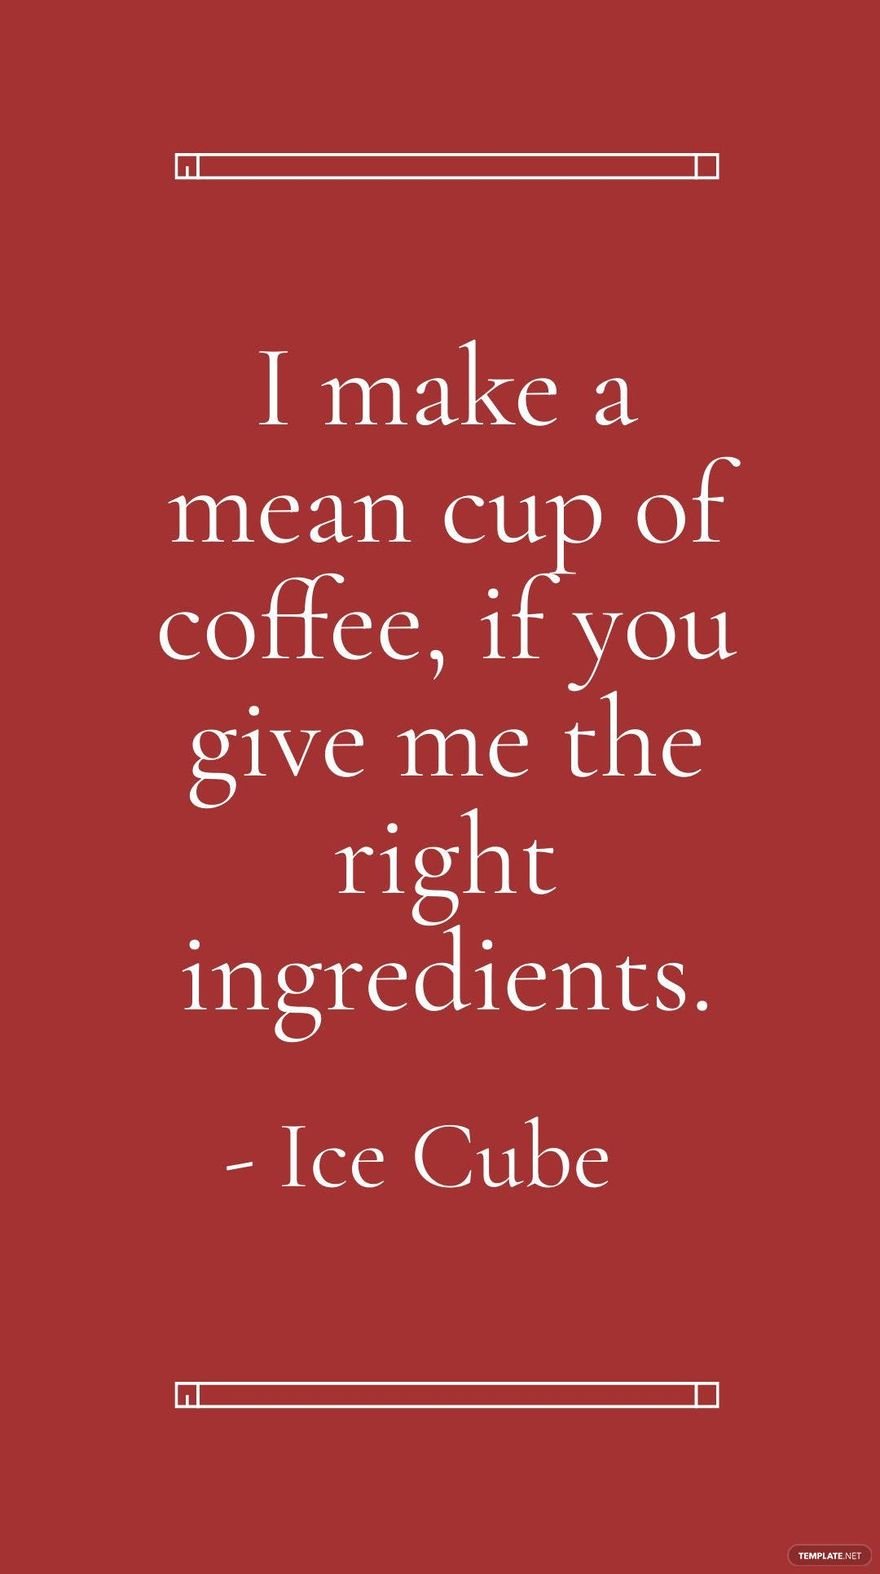 Ice Cube - I make a mean cup of coffee, if you give me the right ingredients. in JPG